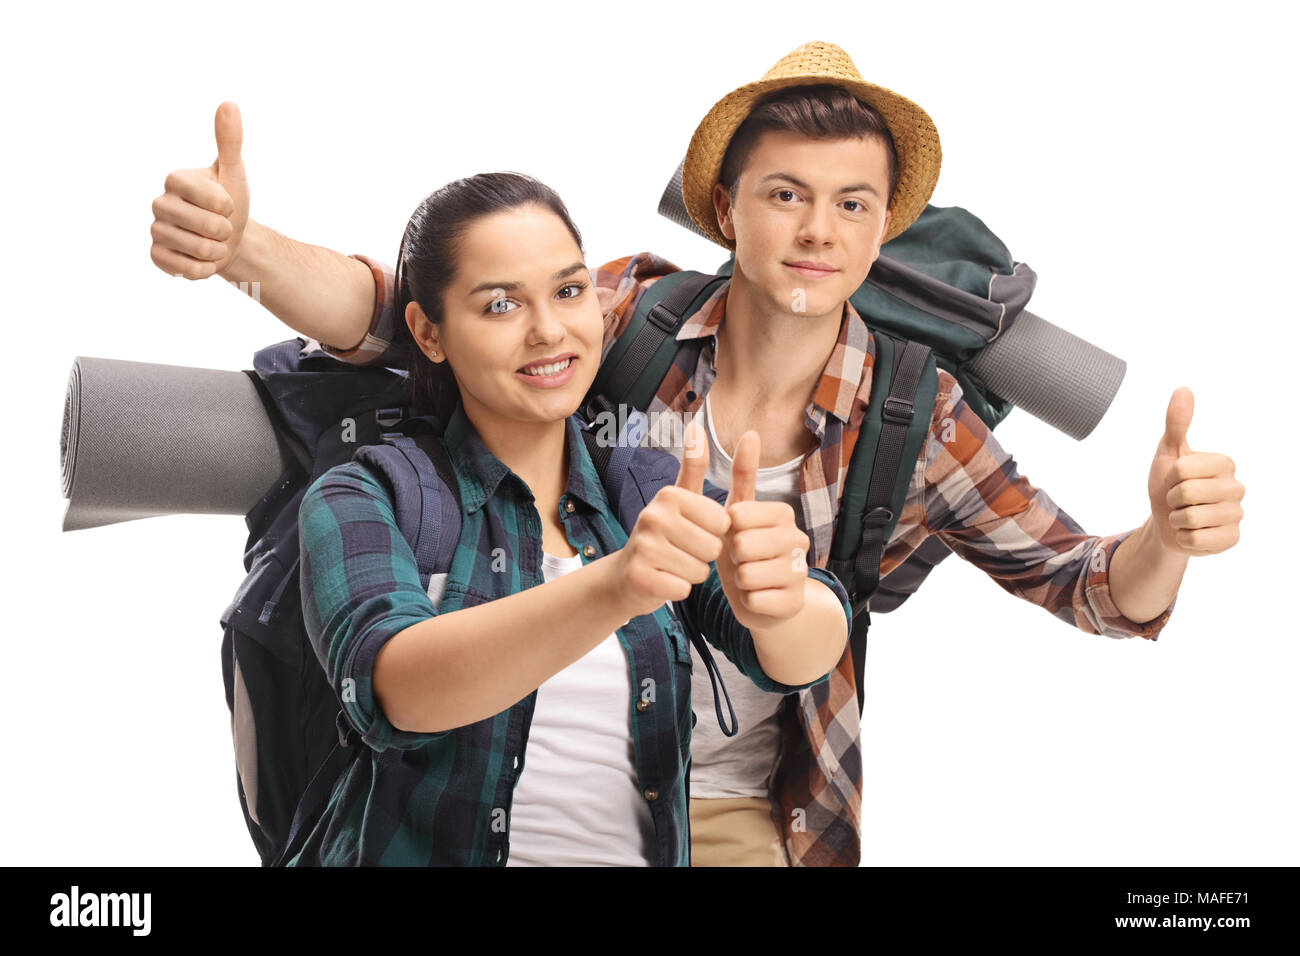 Teenage tourists holding their thumbs up isolated on white background Stock Photo